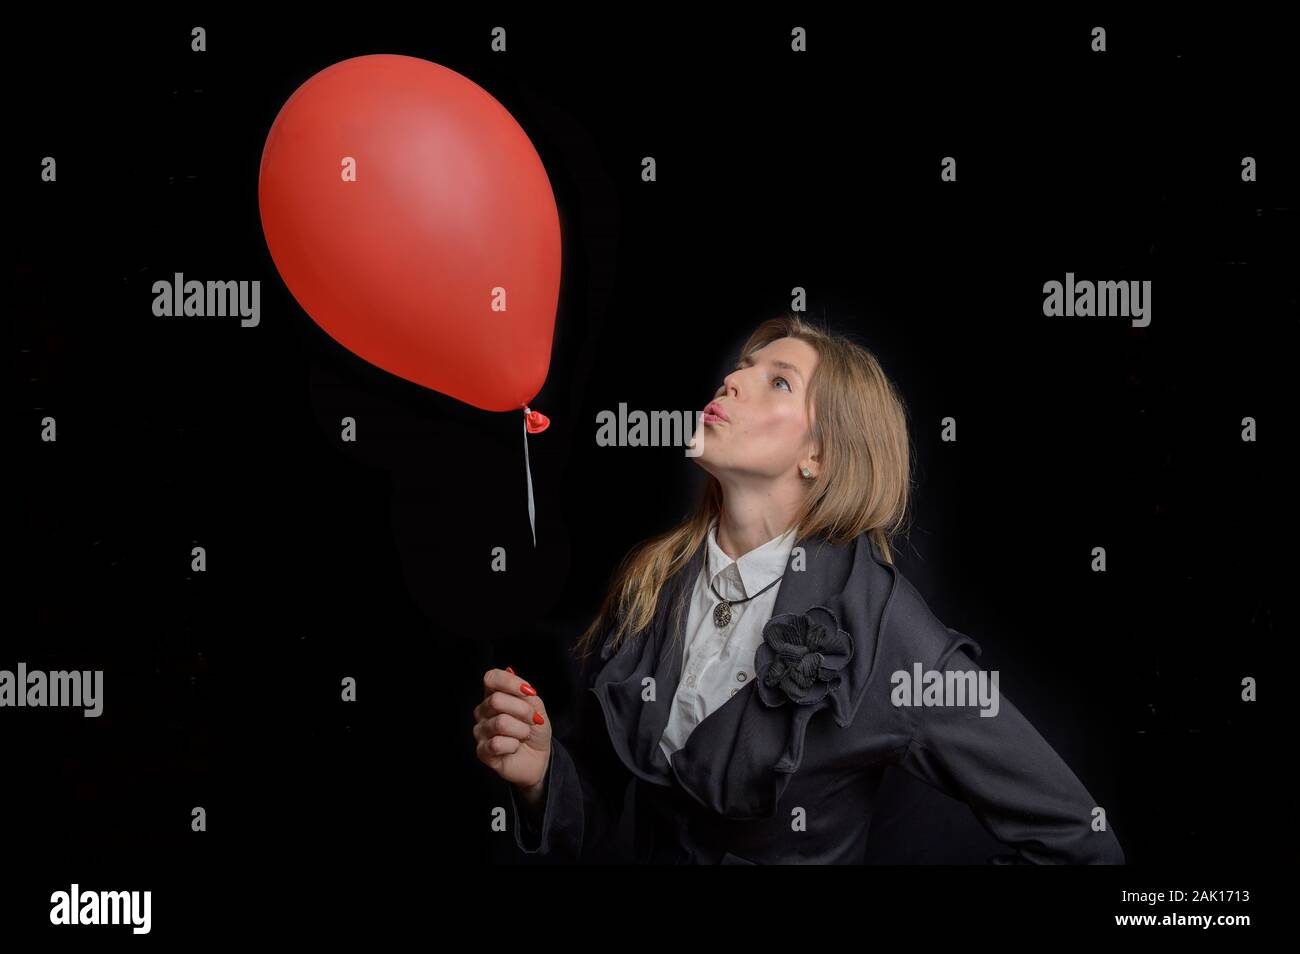 Business woman in a suit blows on a balloon Stock Photo